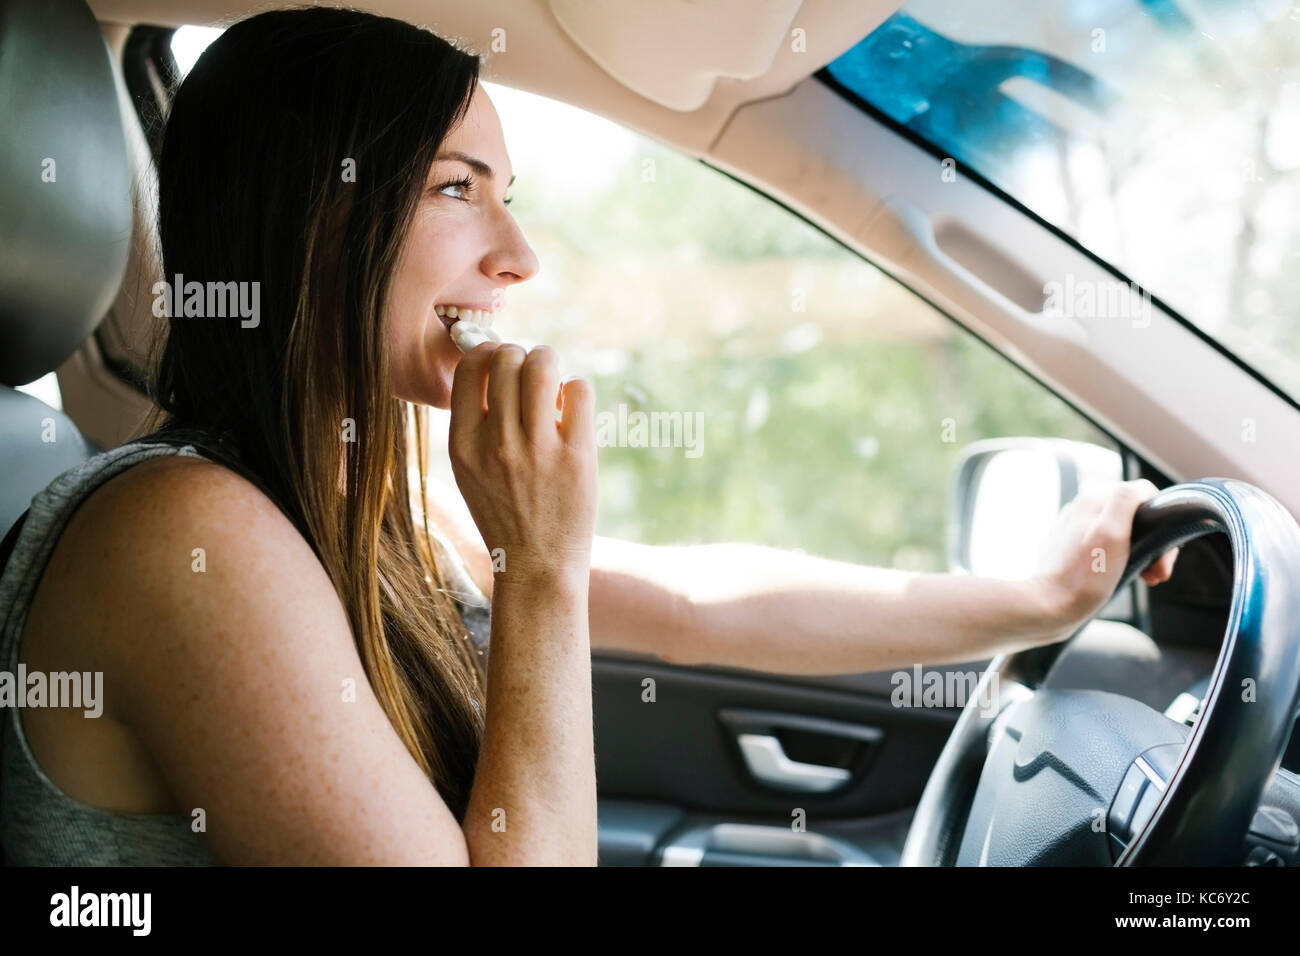 Smiling woman driving car and eating pretzel Stock Photo